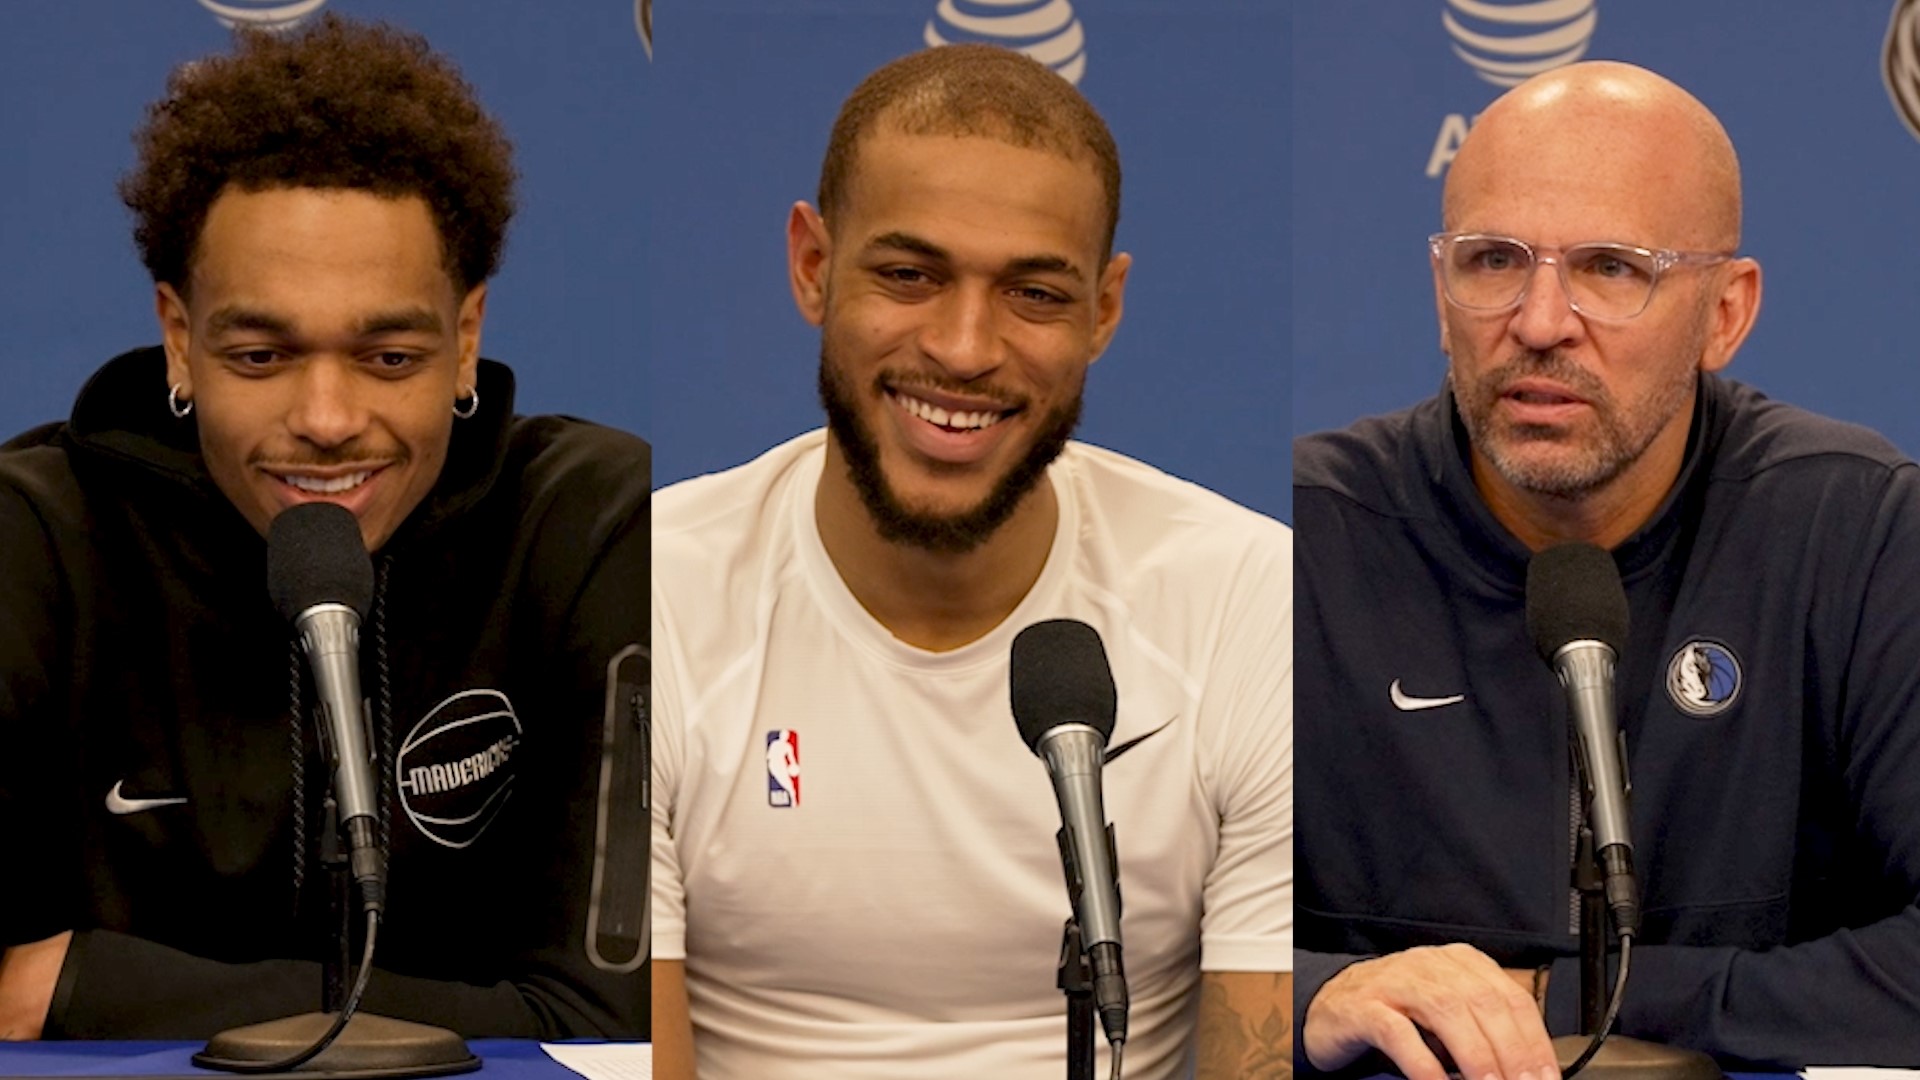 Here is the postgame press conference for P.J. Washington, Daniel Gafford and Jason Kidd after the Mavericks beat the Thunder 146-111 on Feb. 10, 2024.